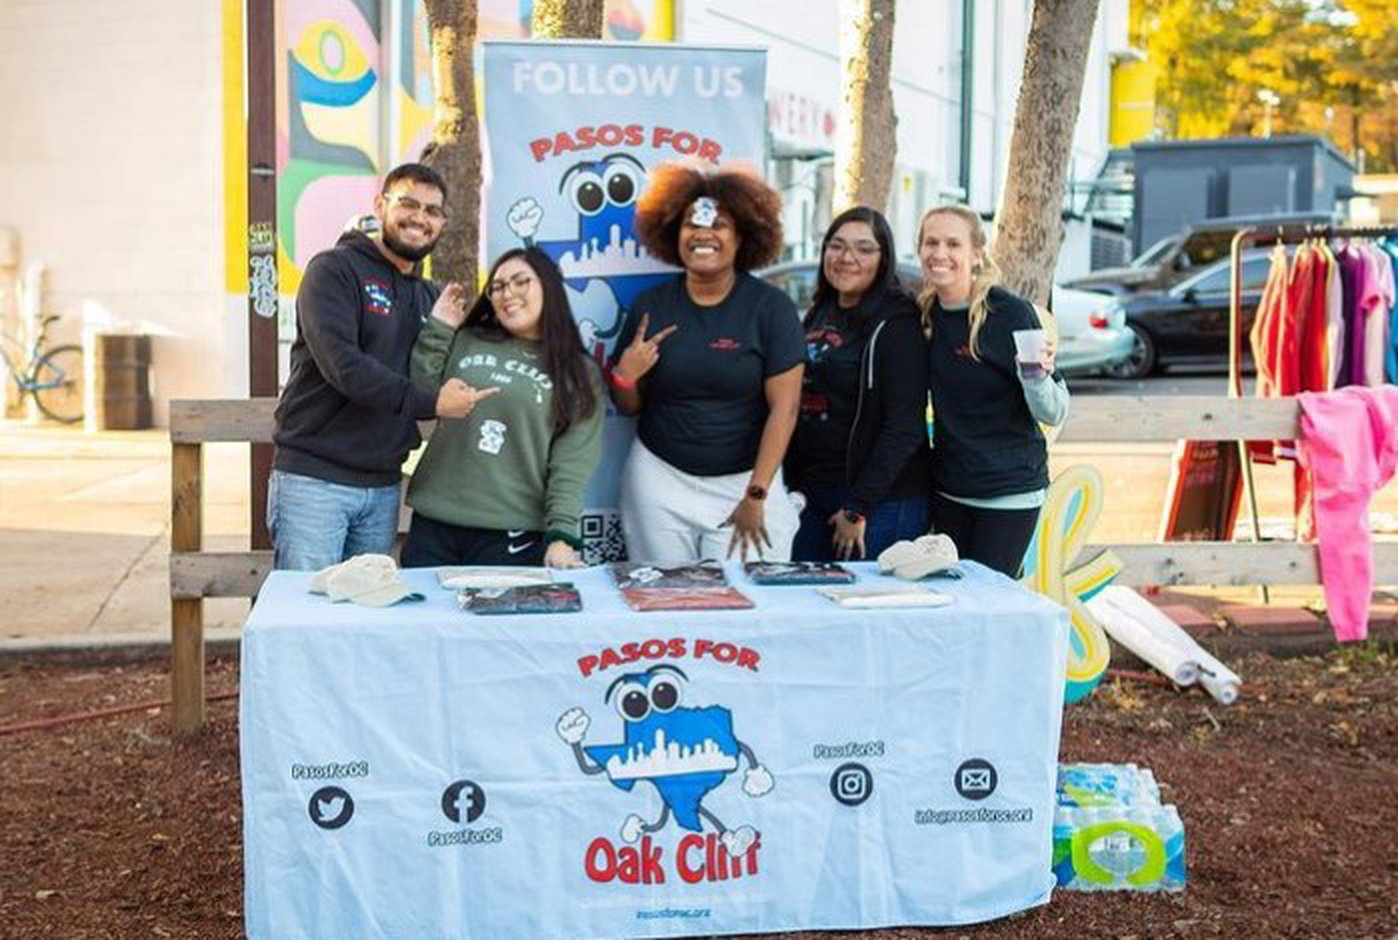 man named jesse acosta and a woman named alejandra zendejas smiling and posing with three women behind a table at a pasos for oak cliff shoe drive